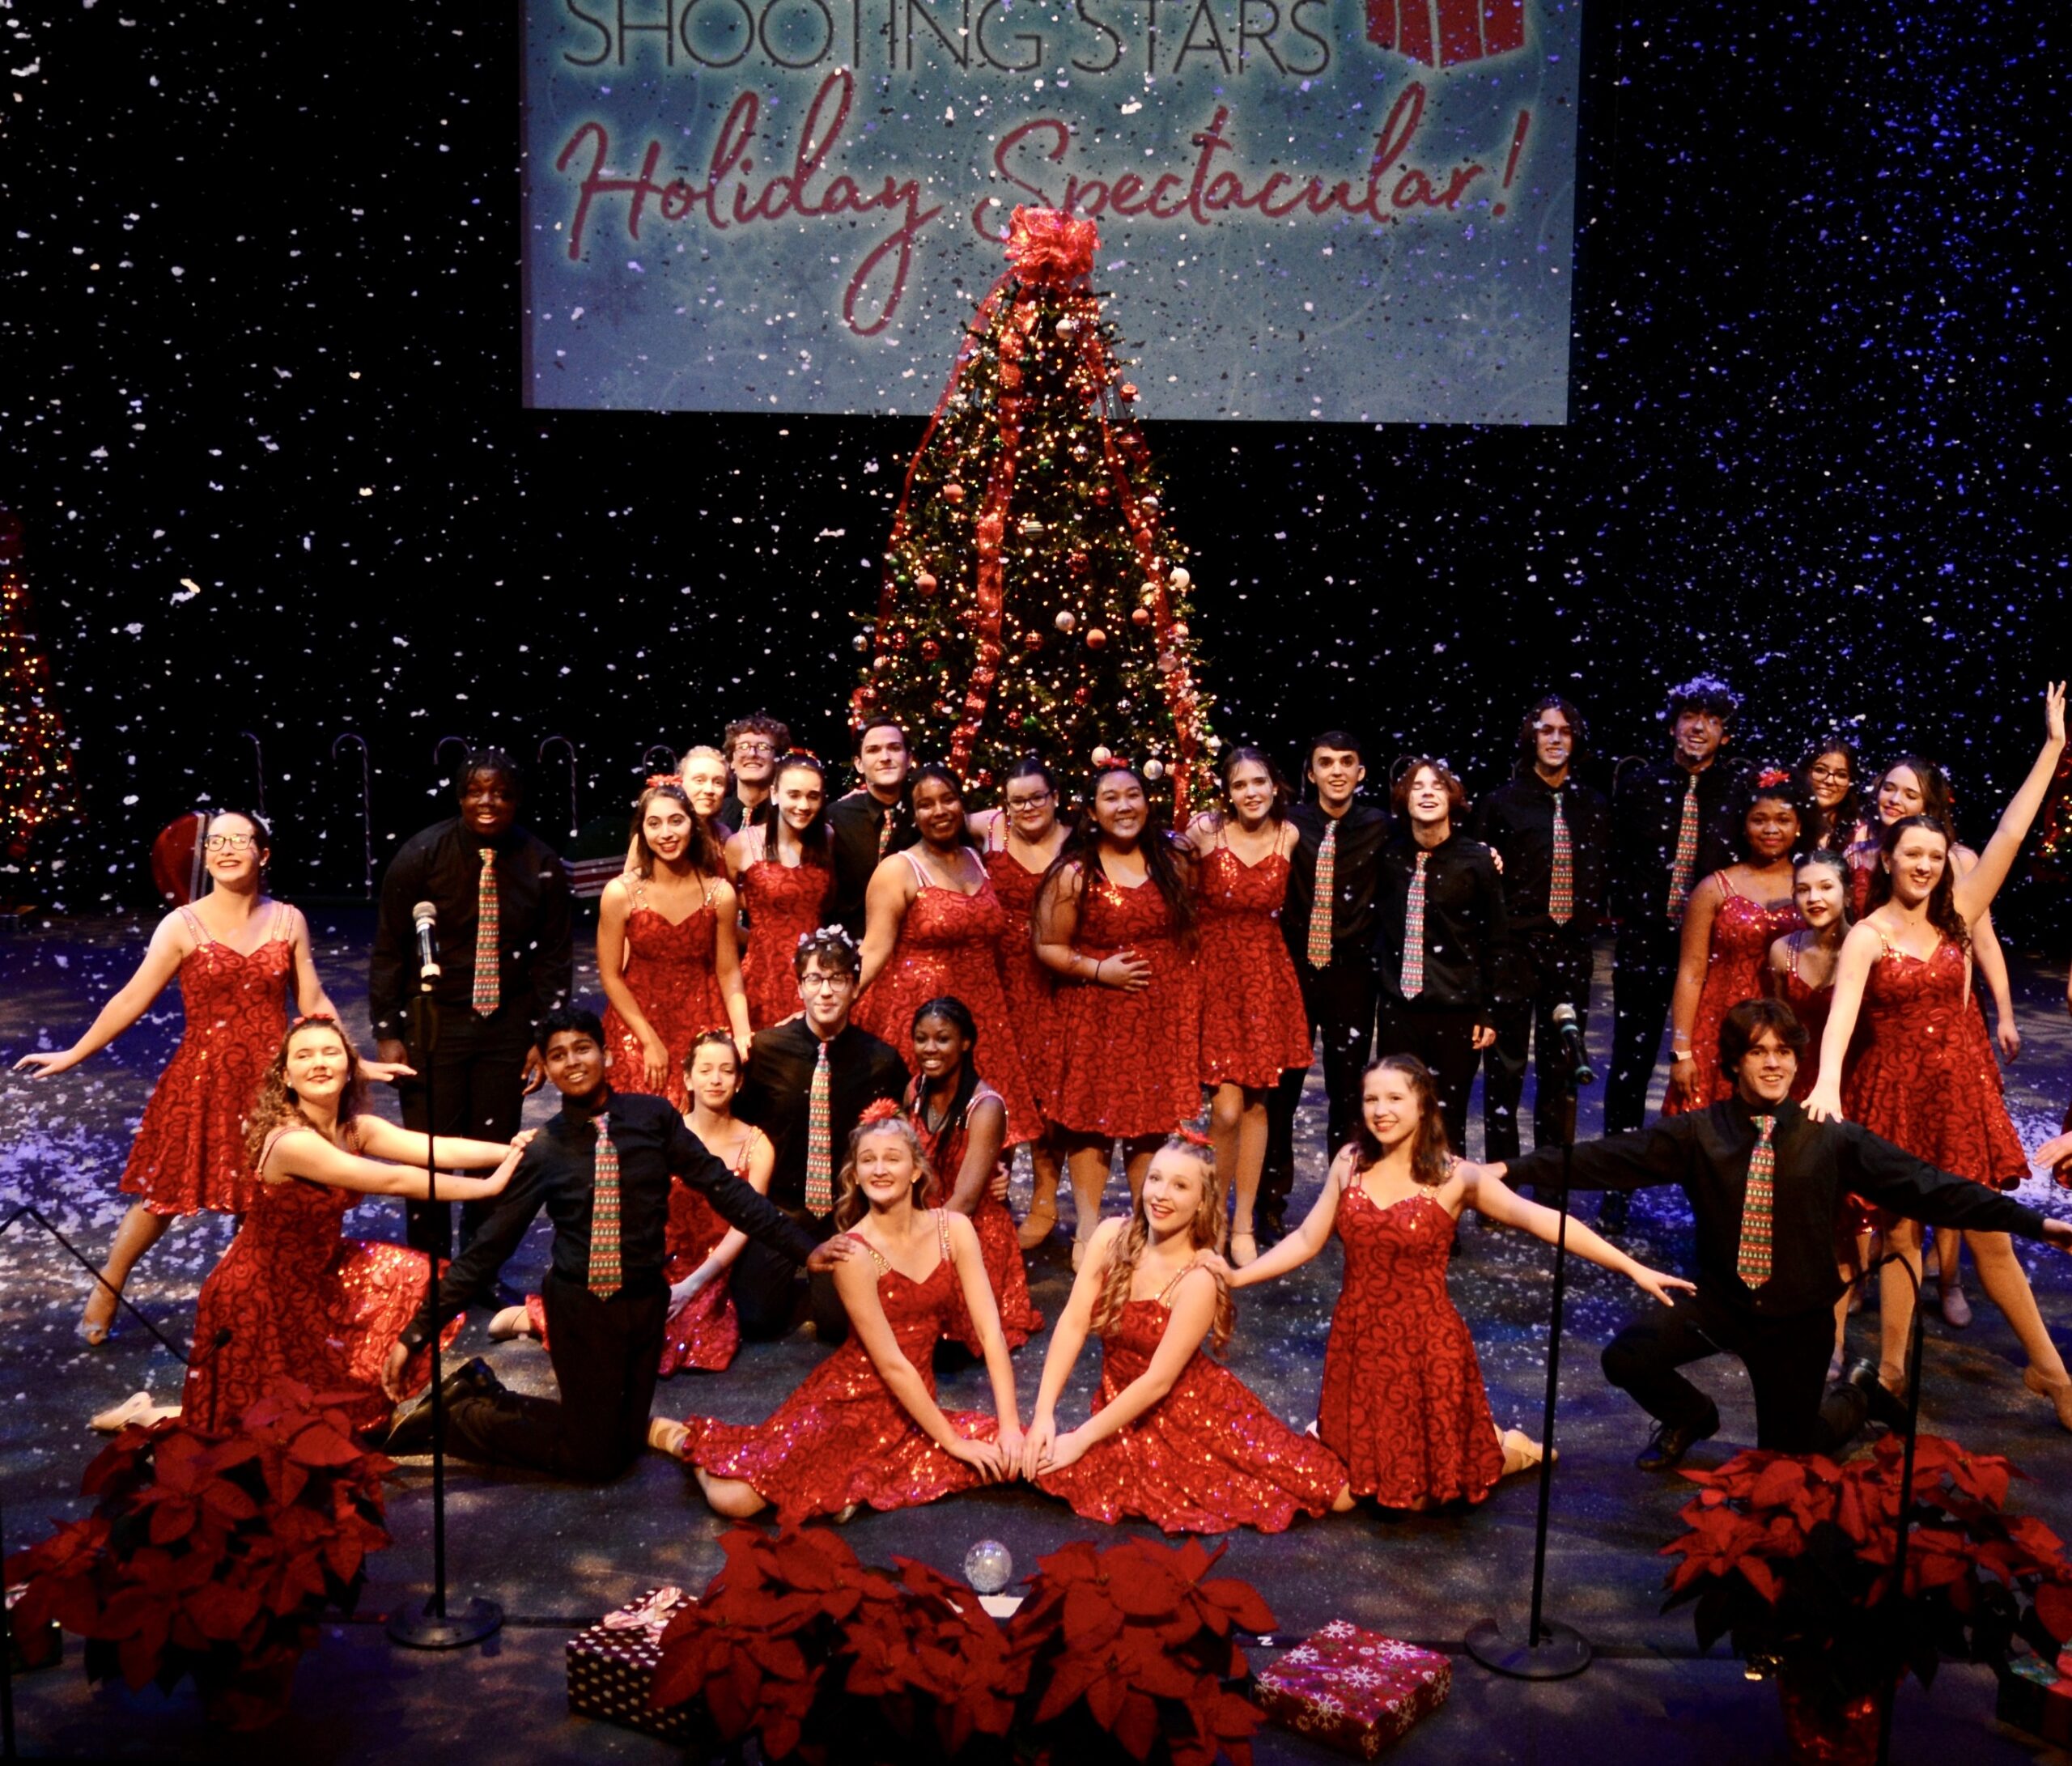 Upper Darby Shooting Stars Holiday Spectacular